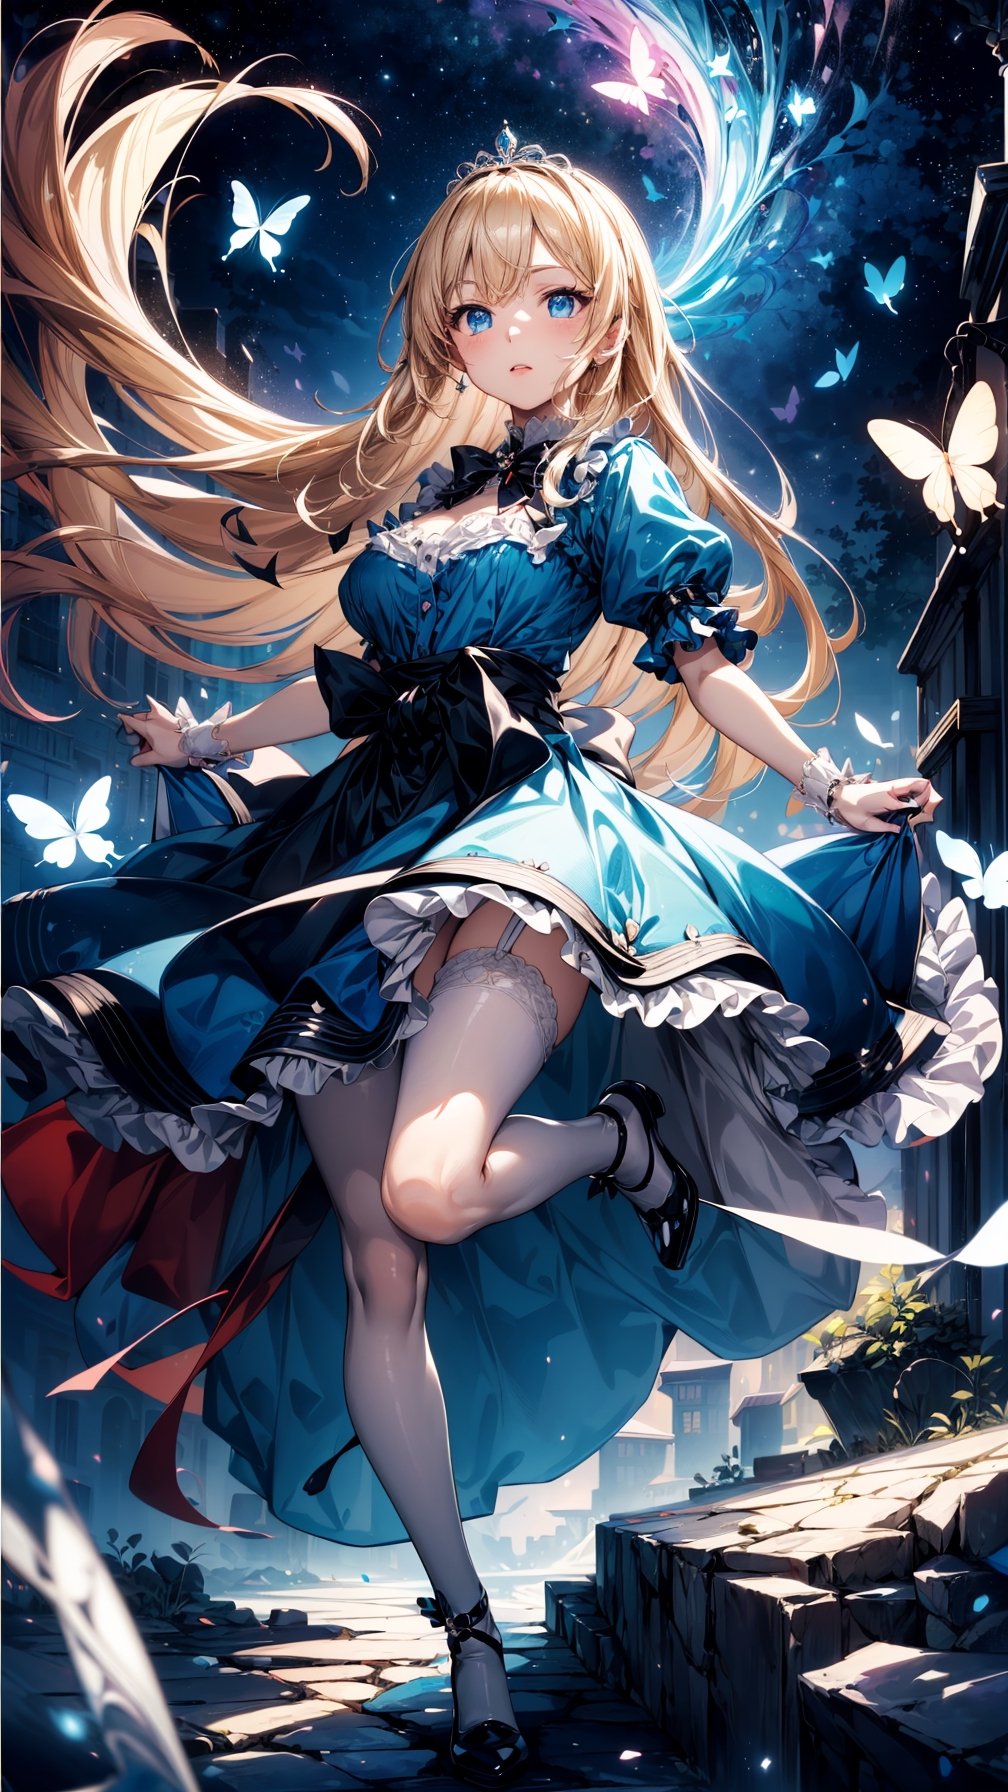 (best quality, masterpiece, illustration, designer, lighting), (extremely detailed CG 8k wallpaper unit), (detailed and expressive eyes), detailed particles, beautiful lighting, a cute girl, long blonde hair, wearing a teddy bear tiara, donning a beautiful blue and white dress with ruffles and lace, sheer pink stockings, transparent aquamarine crystal shoes, bows around her waist (Alice in Wonderland), butterflies around, (Pixiv anime style),(manga style), ((floating in sky)), flowy dress, floating, bubble, dark blue background,Hair with scenery, starry sky,dynamic pose,